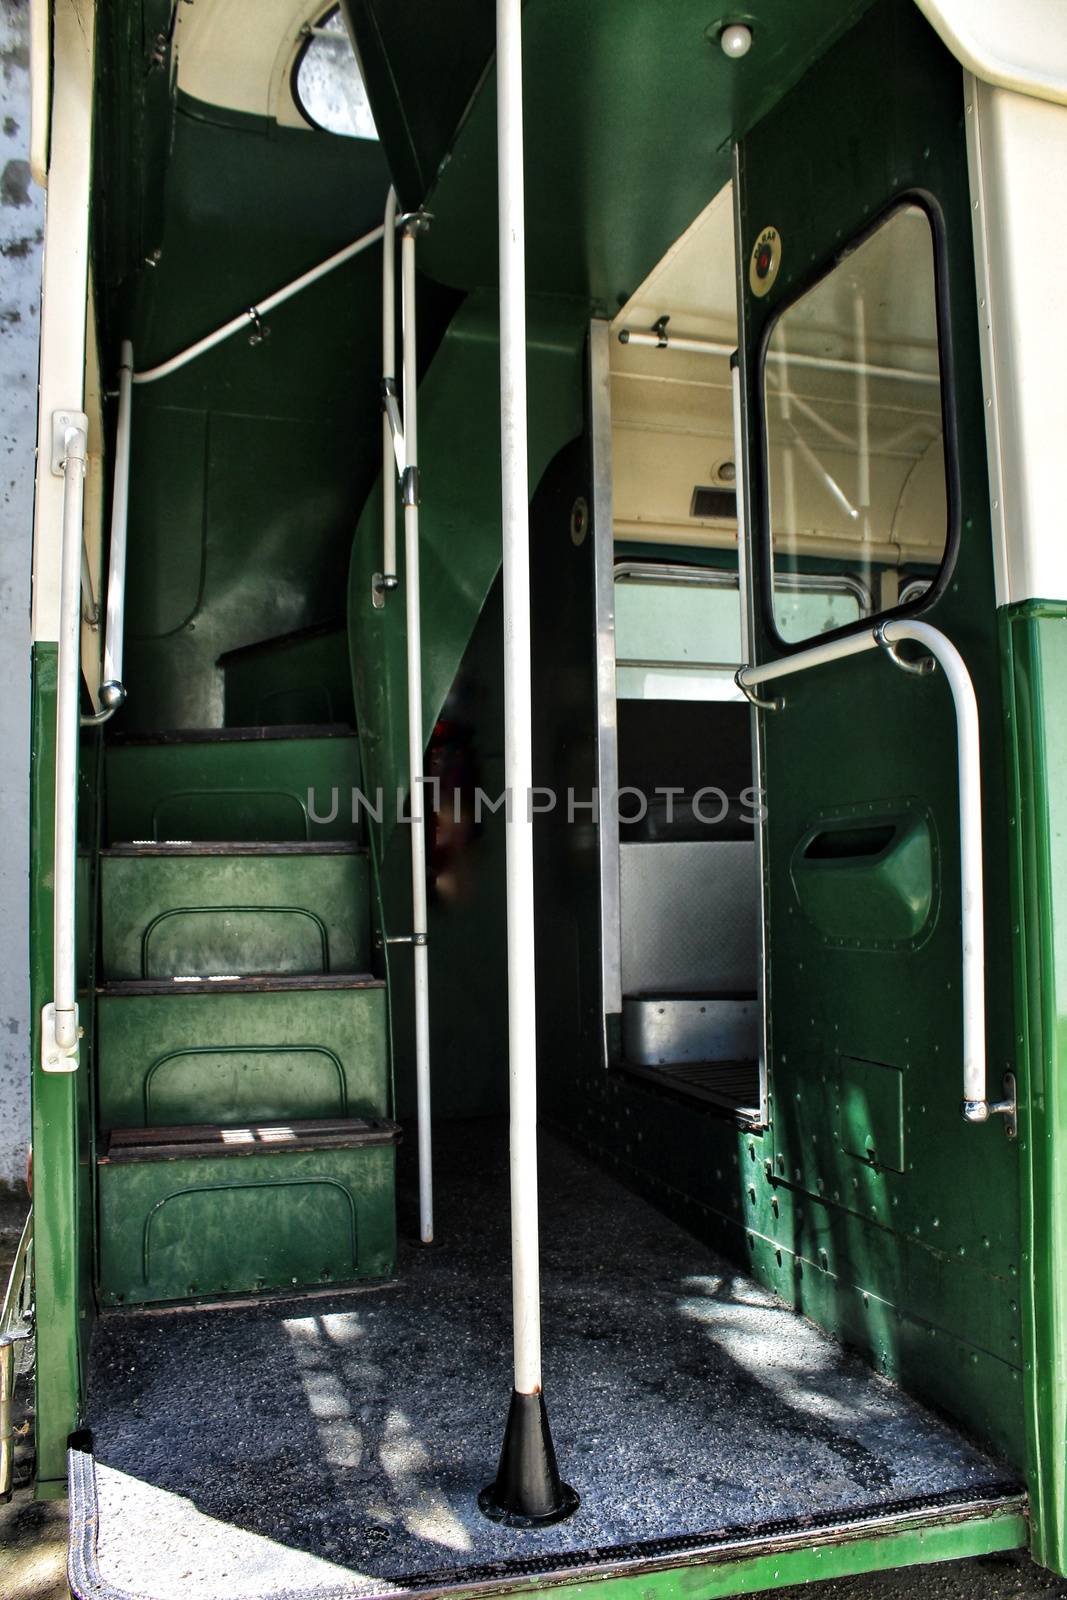 Old and rusty inside passenger bus by soniabonet